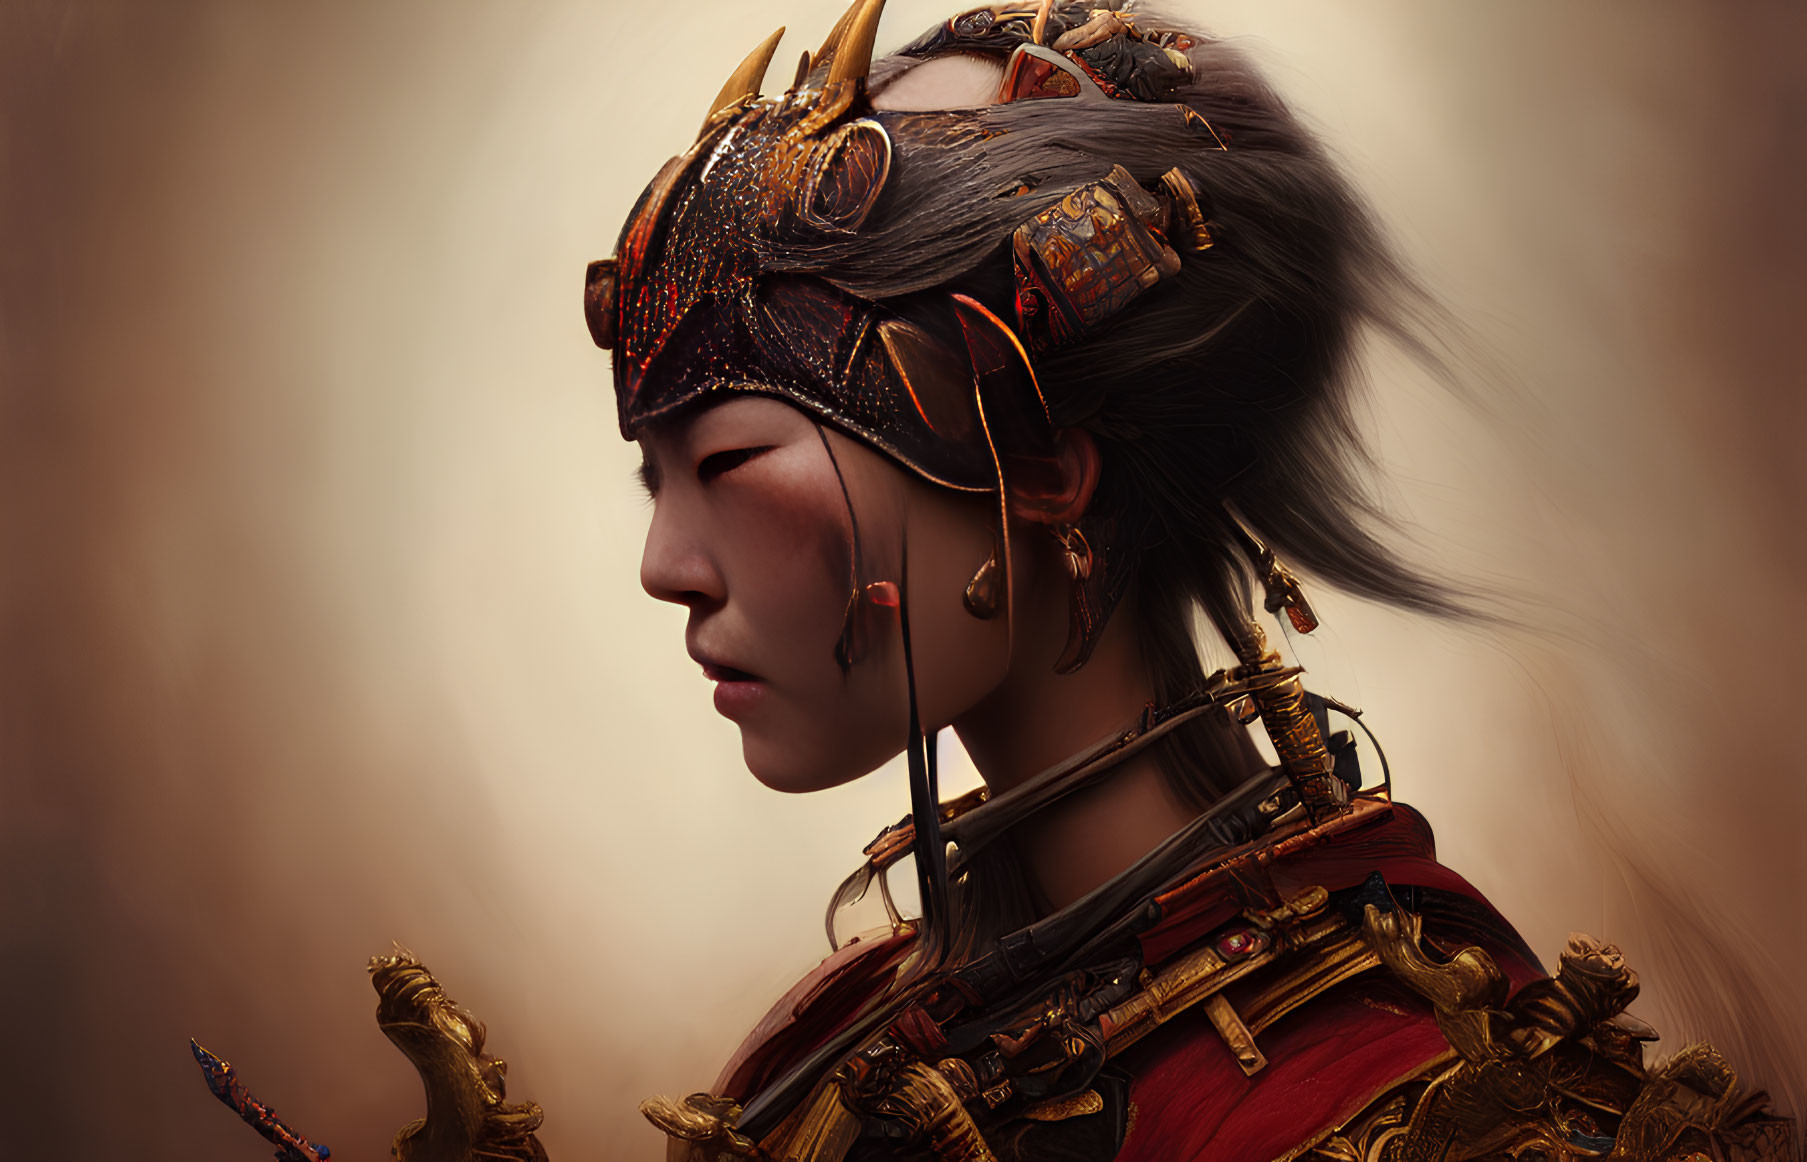 Detailed portrait of a person in ornate traditional armor with intricate helmet and contemplative expression